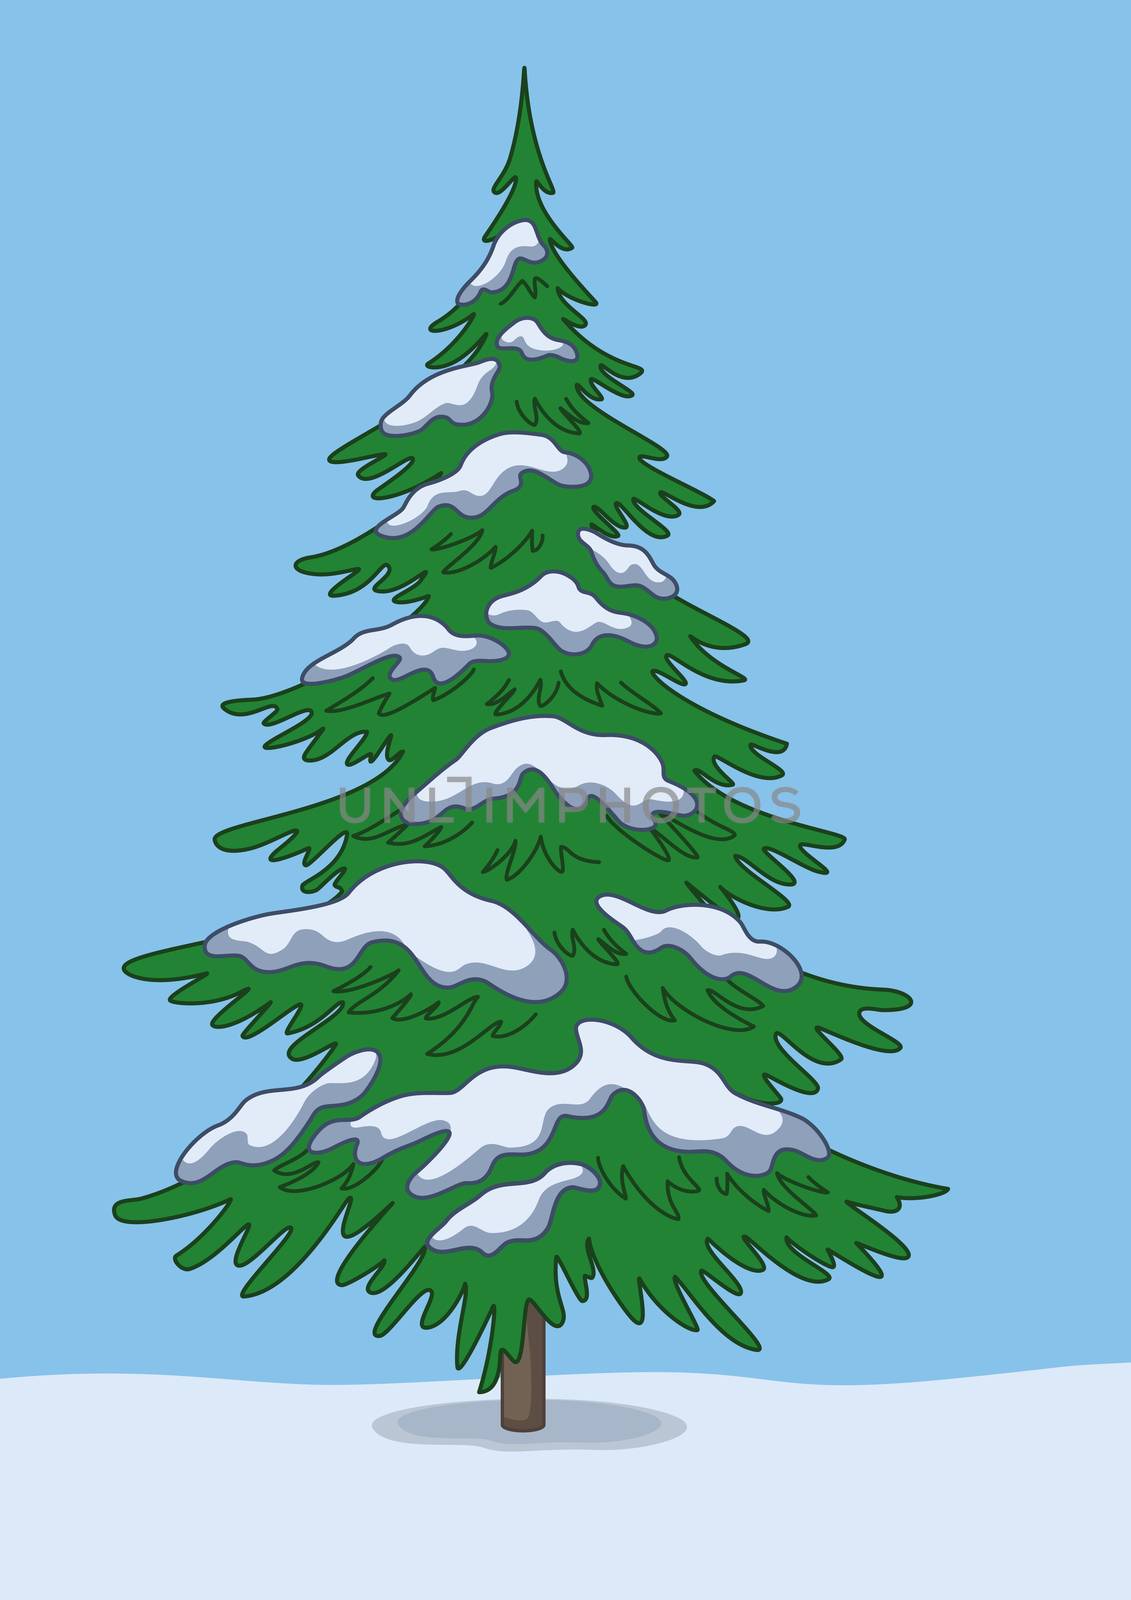 Christmas tree, snow and sky by alexcoolok